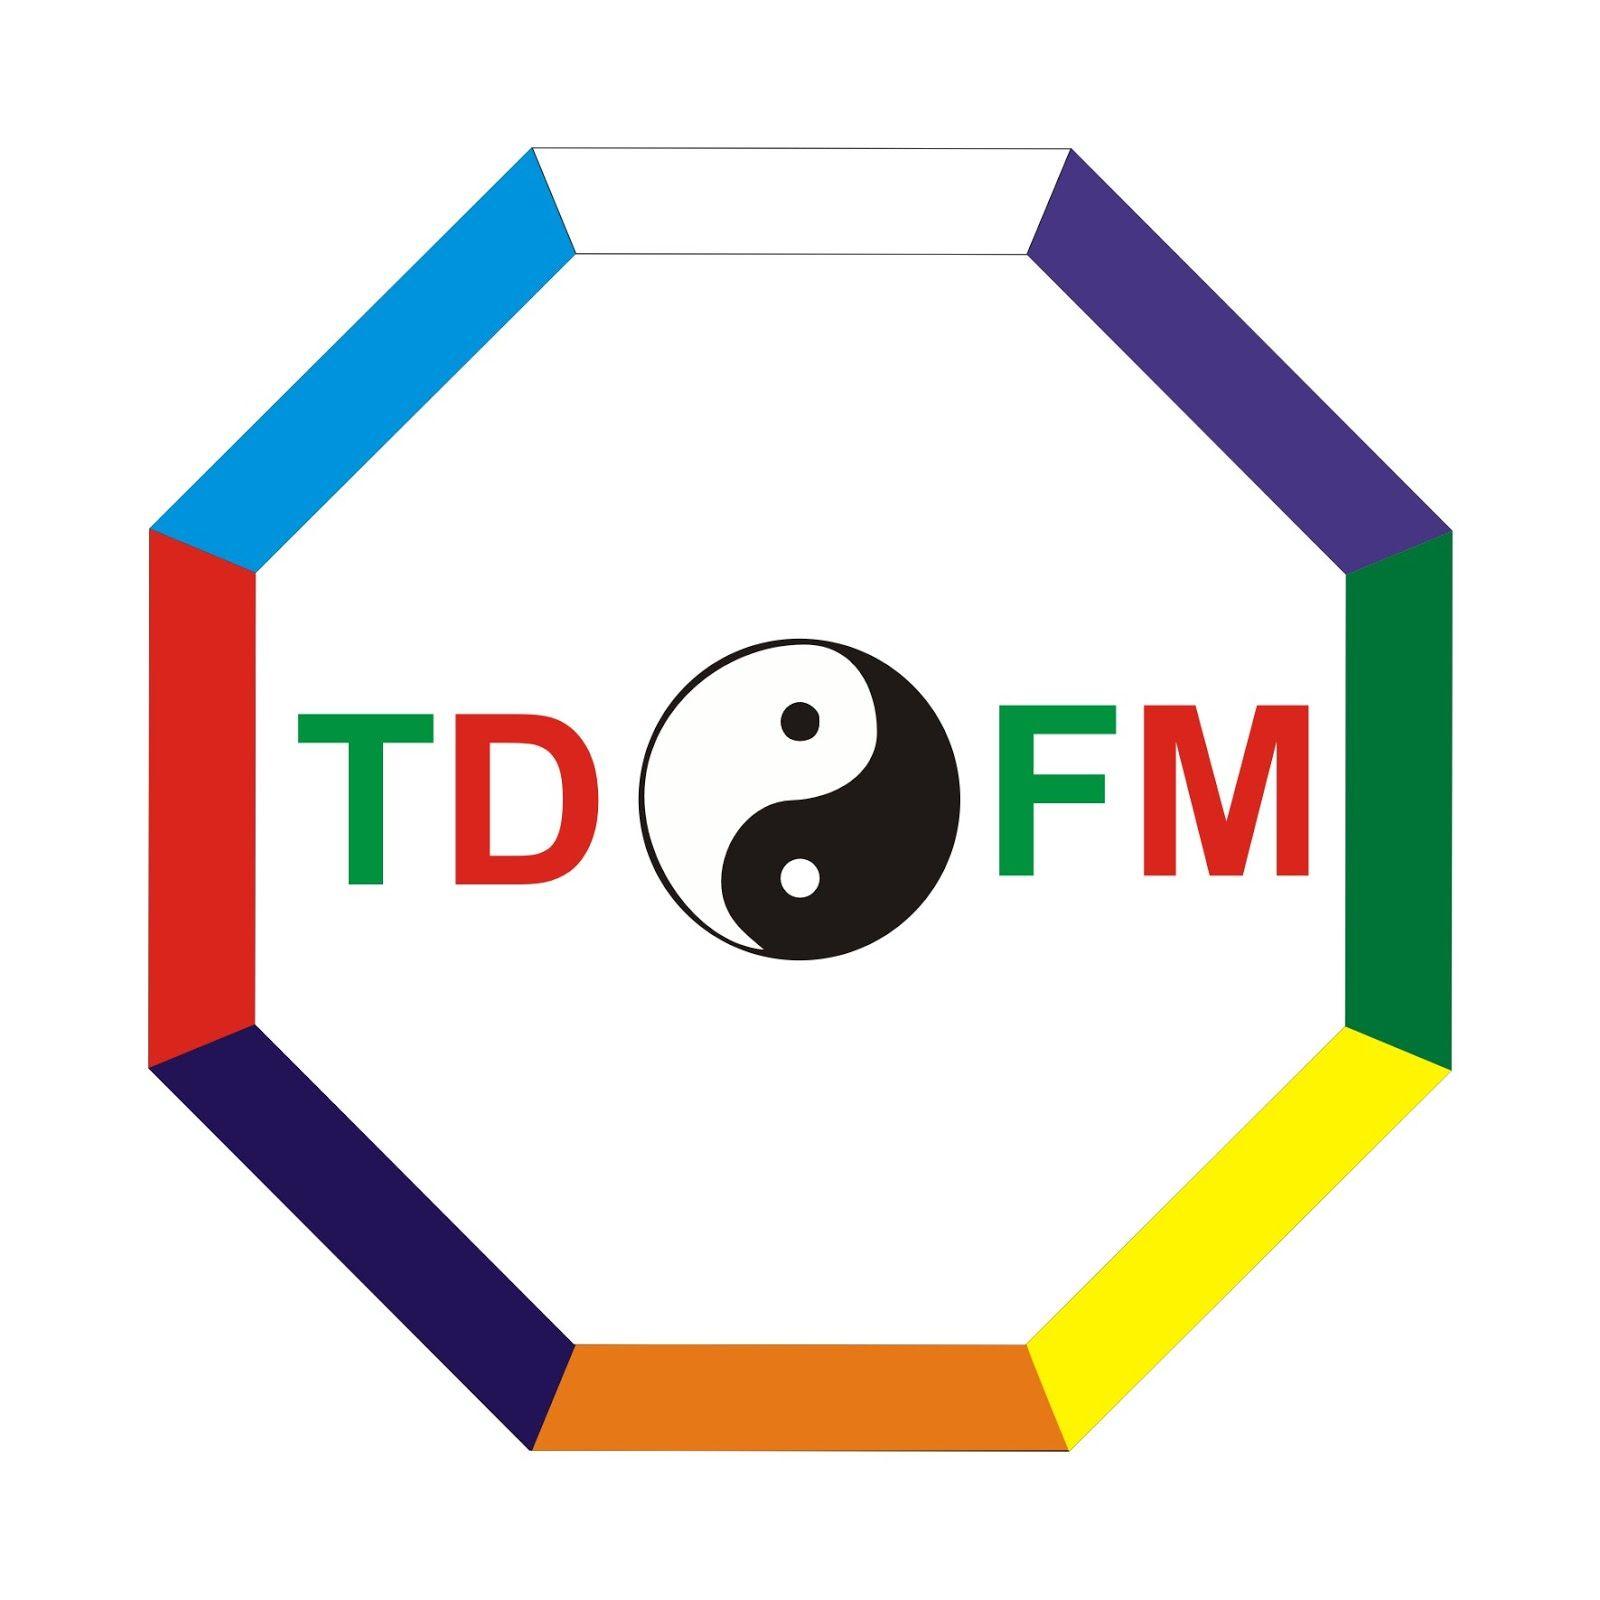 DFM Logo - Significance of Logo of 'Tao of DFM ' & Practice Training on DFM as ...